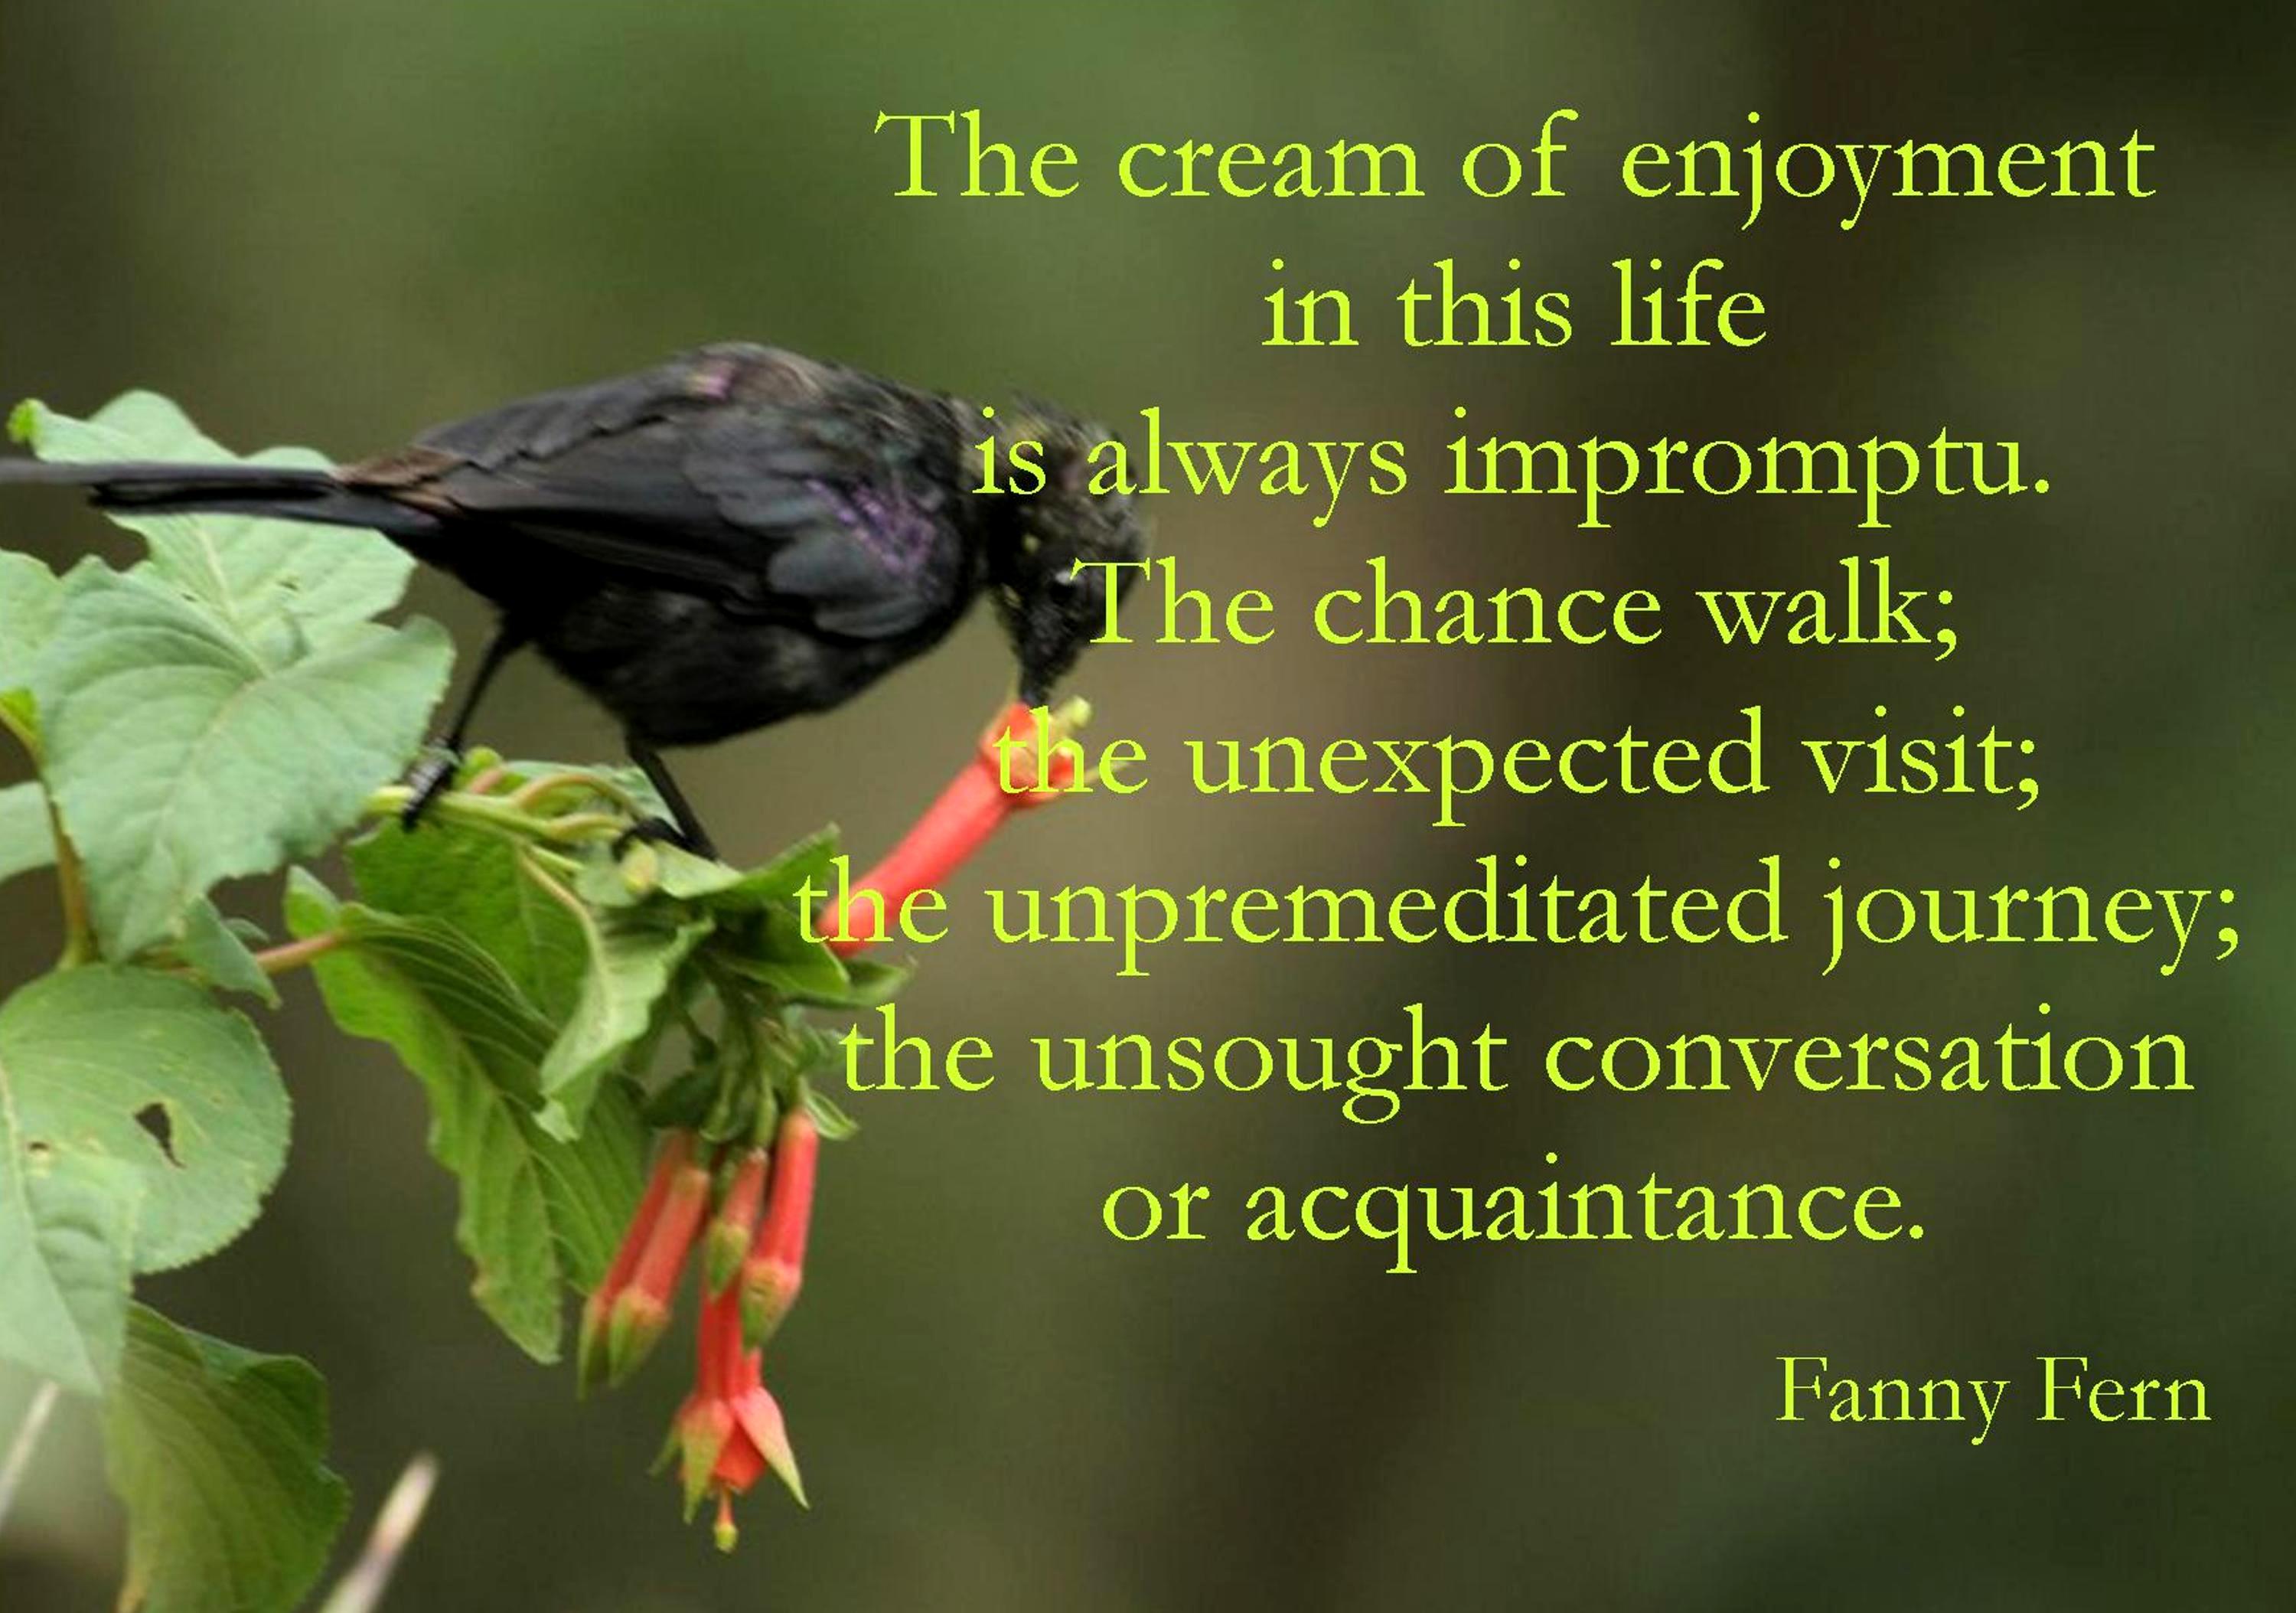 The cream of enjoyment in this life is always impromptu. The chance walk; the unexpected visit; the unpremeditated journey; the unsought ... Fanny Fern